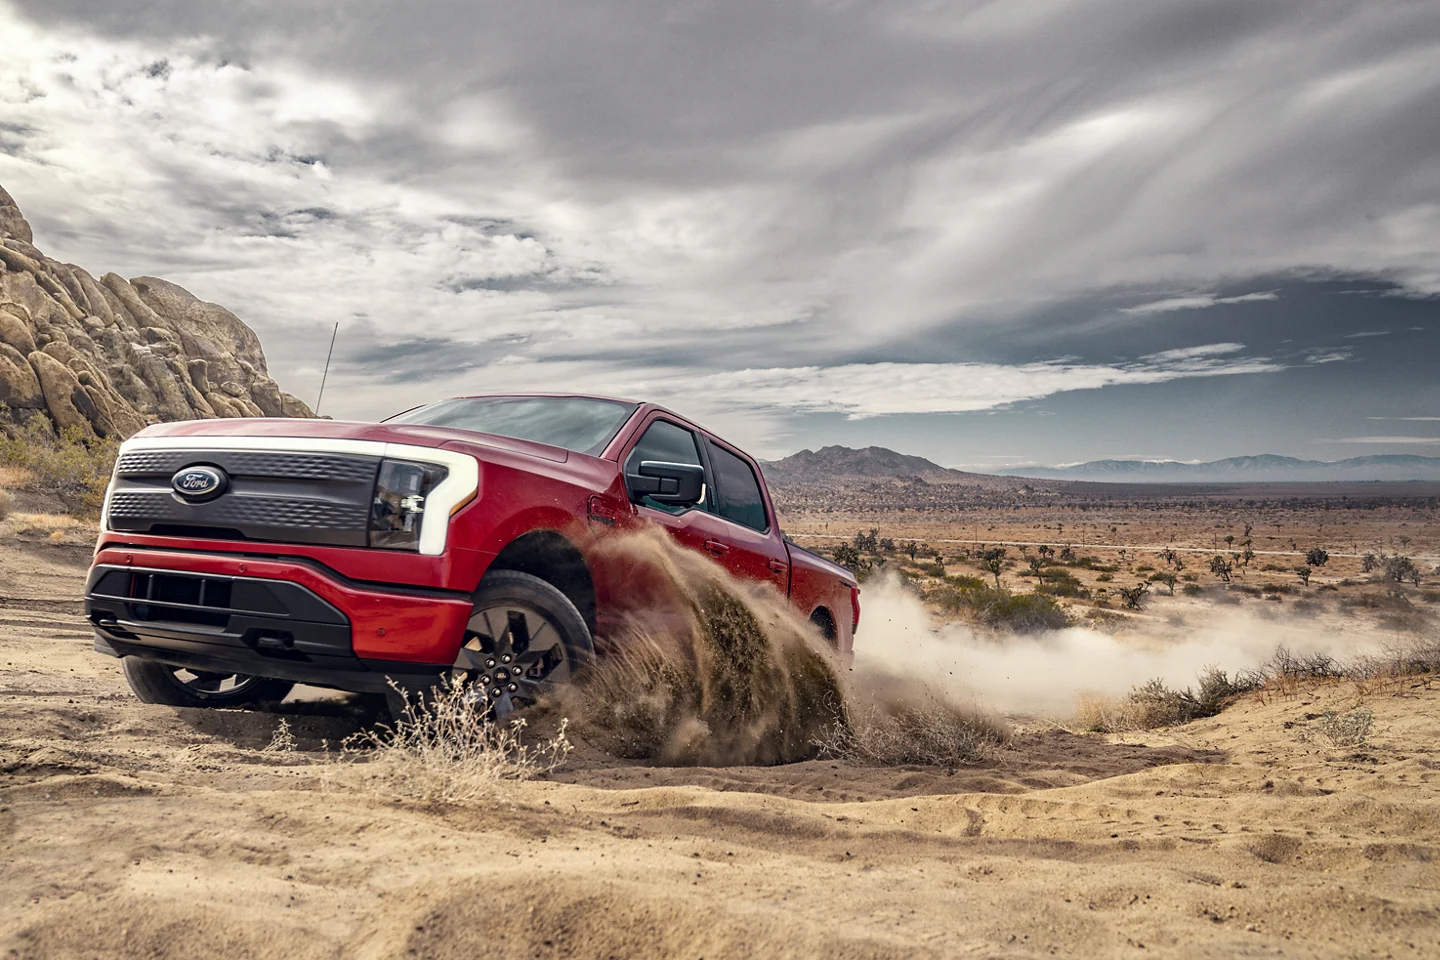 Discover the unrivaled capabilities of the legendary 2022 Ford F-150 Lightning®. This truck is ready to perform the job right from its ruggedness to its efficiency. Stop by AutoFair Ford in Manchester, check out their entire selection of F-150 Lightning, and take one home today.